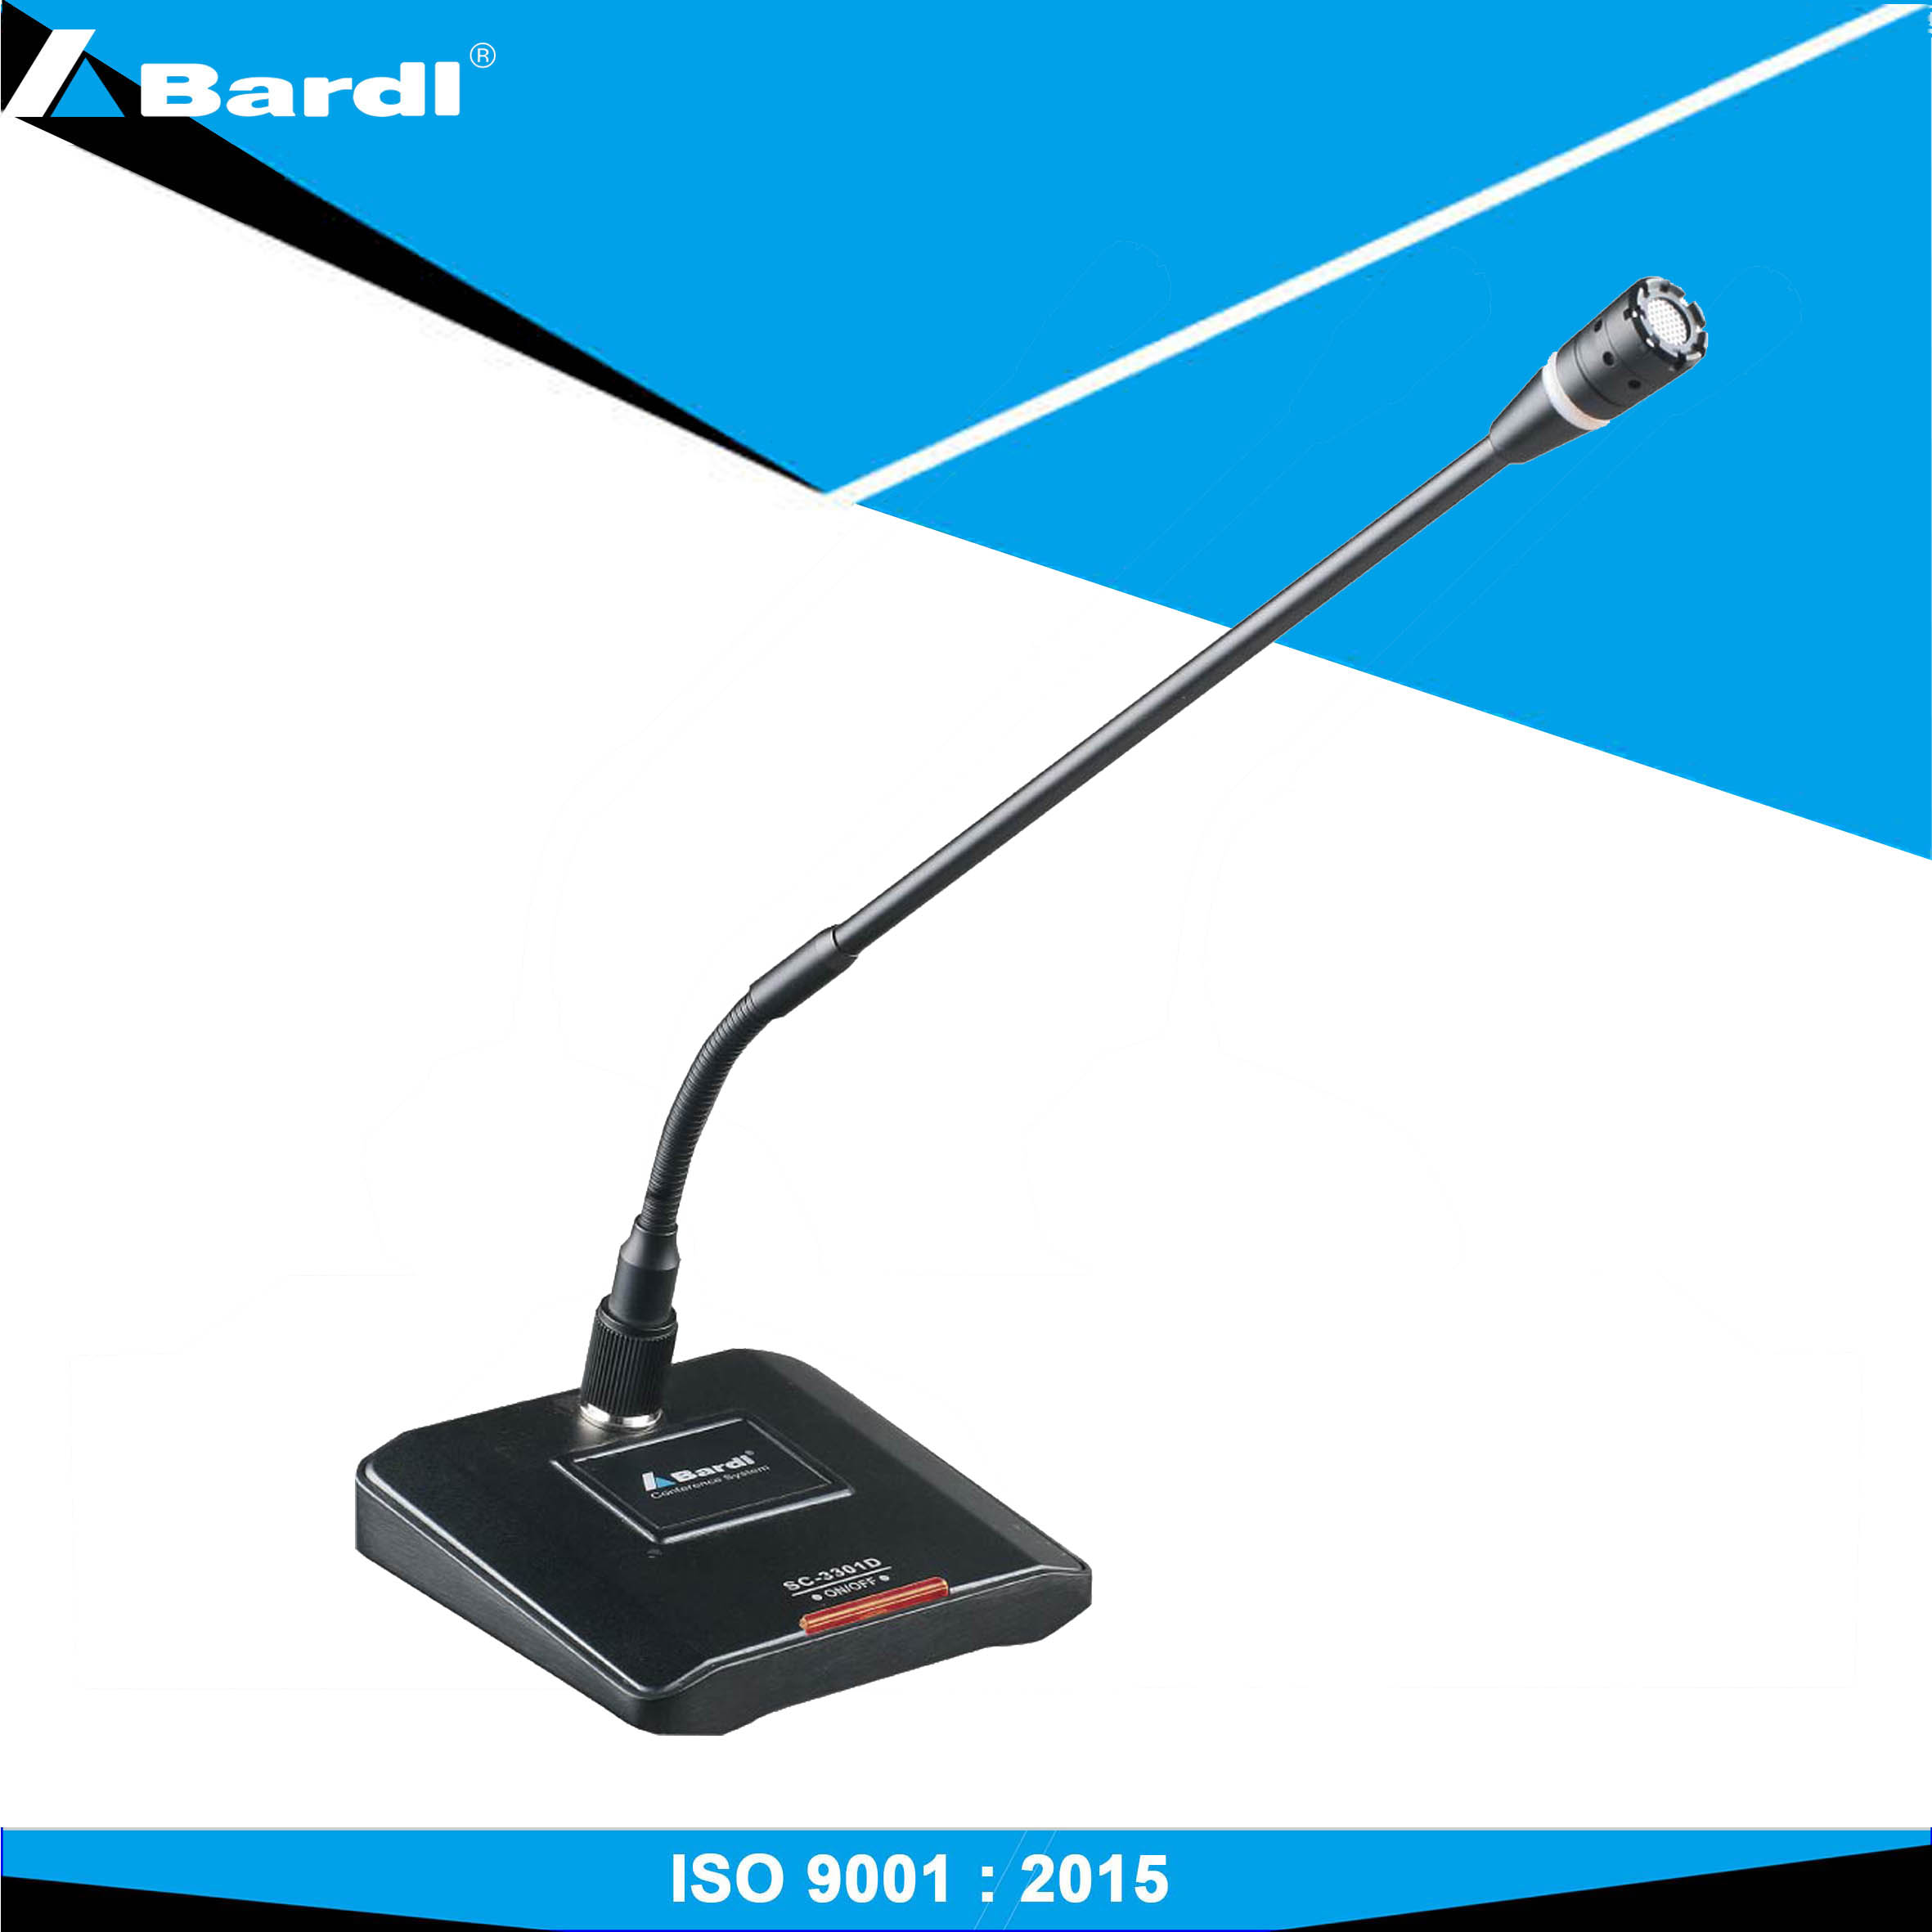 Bardl Conference system SC-3301